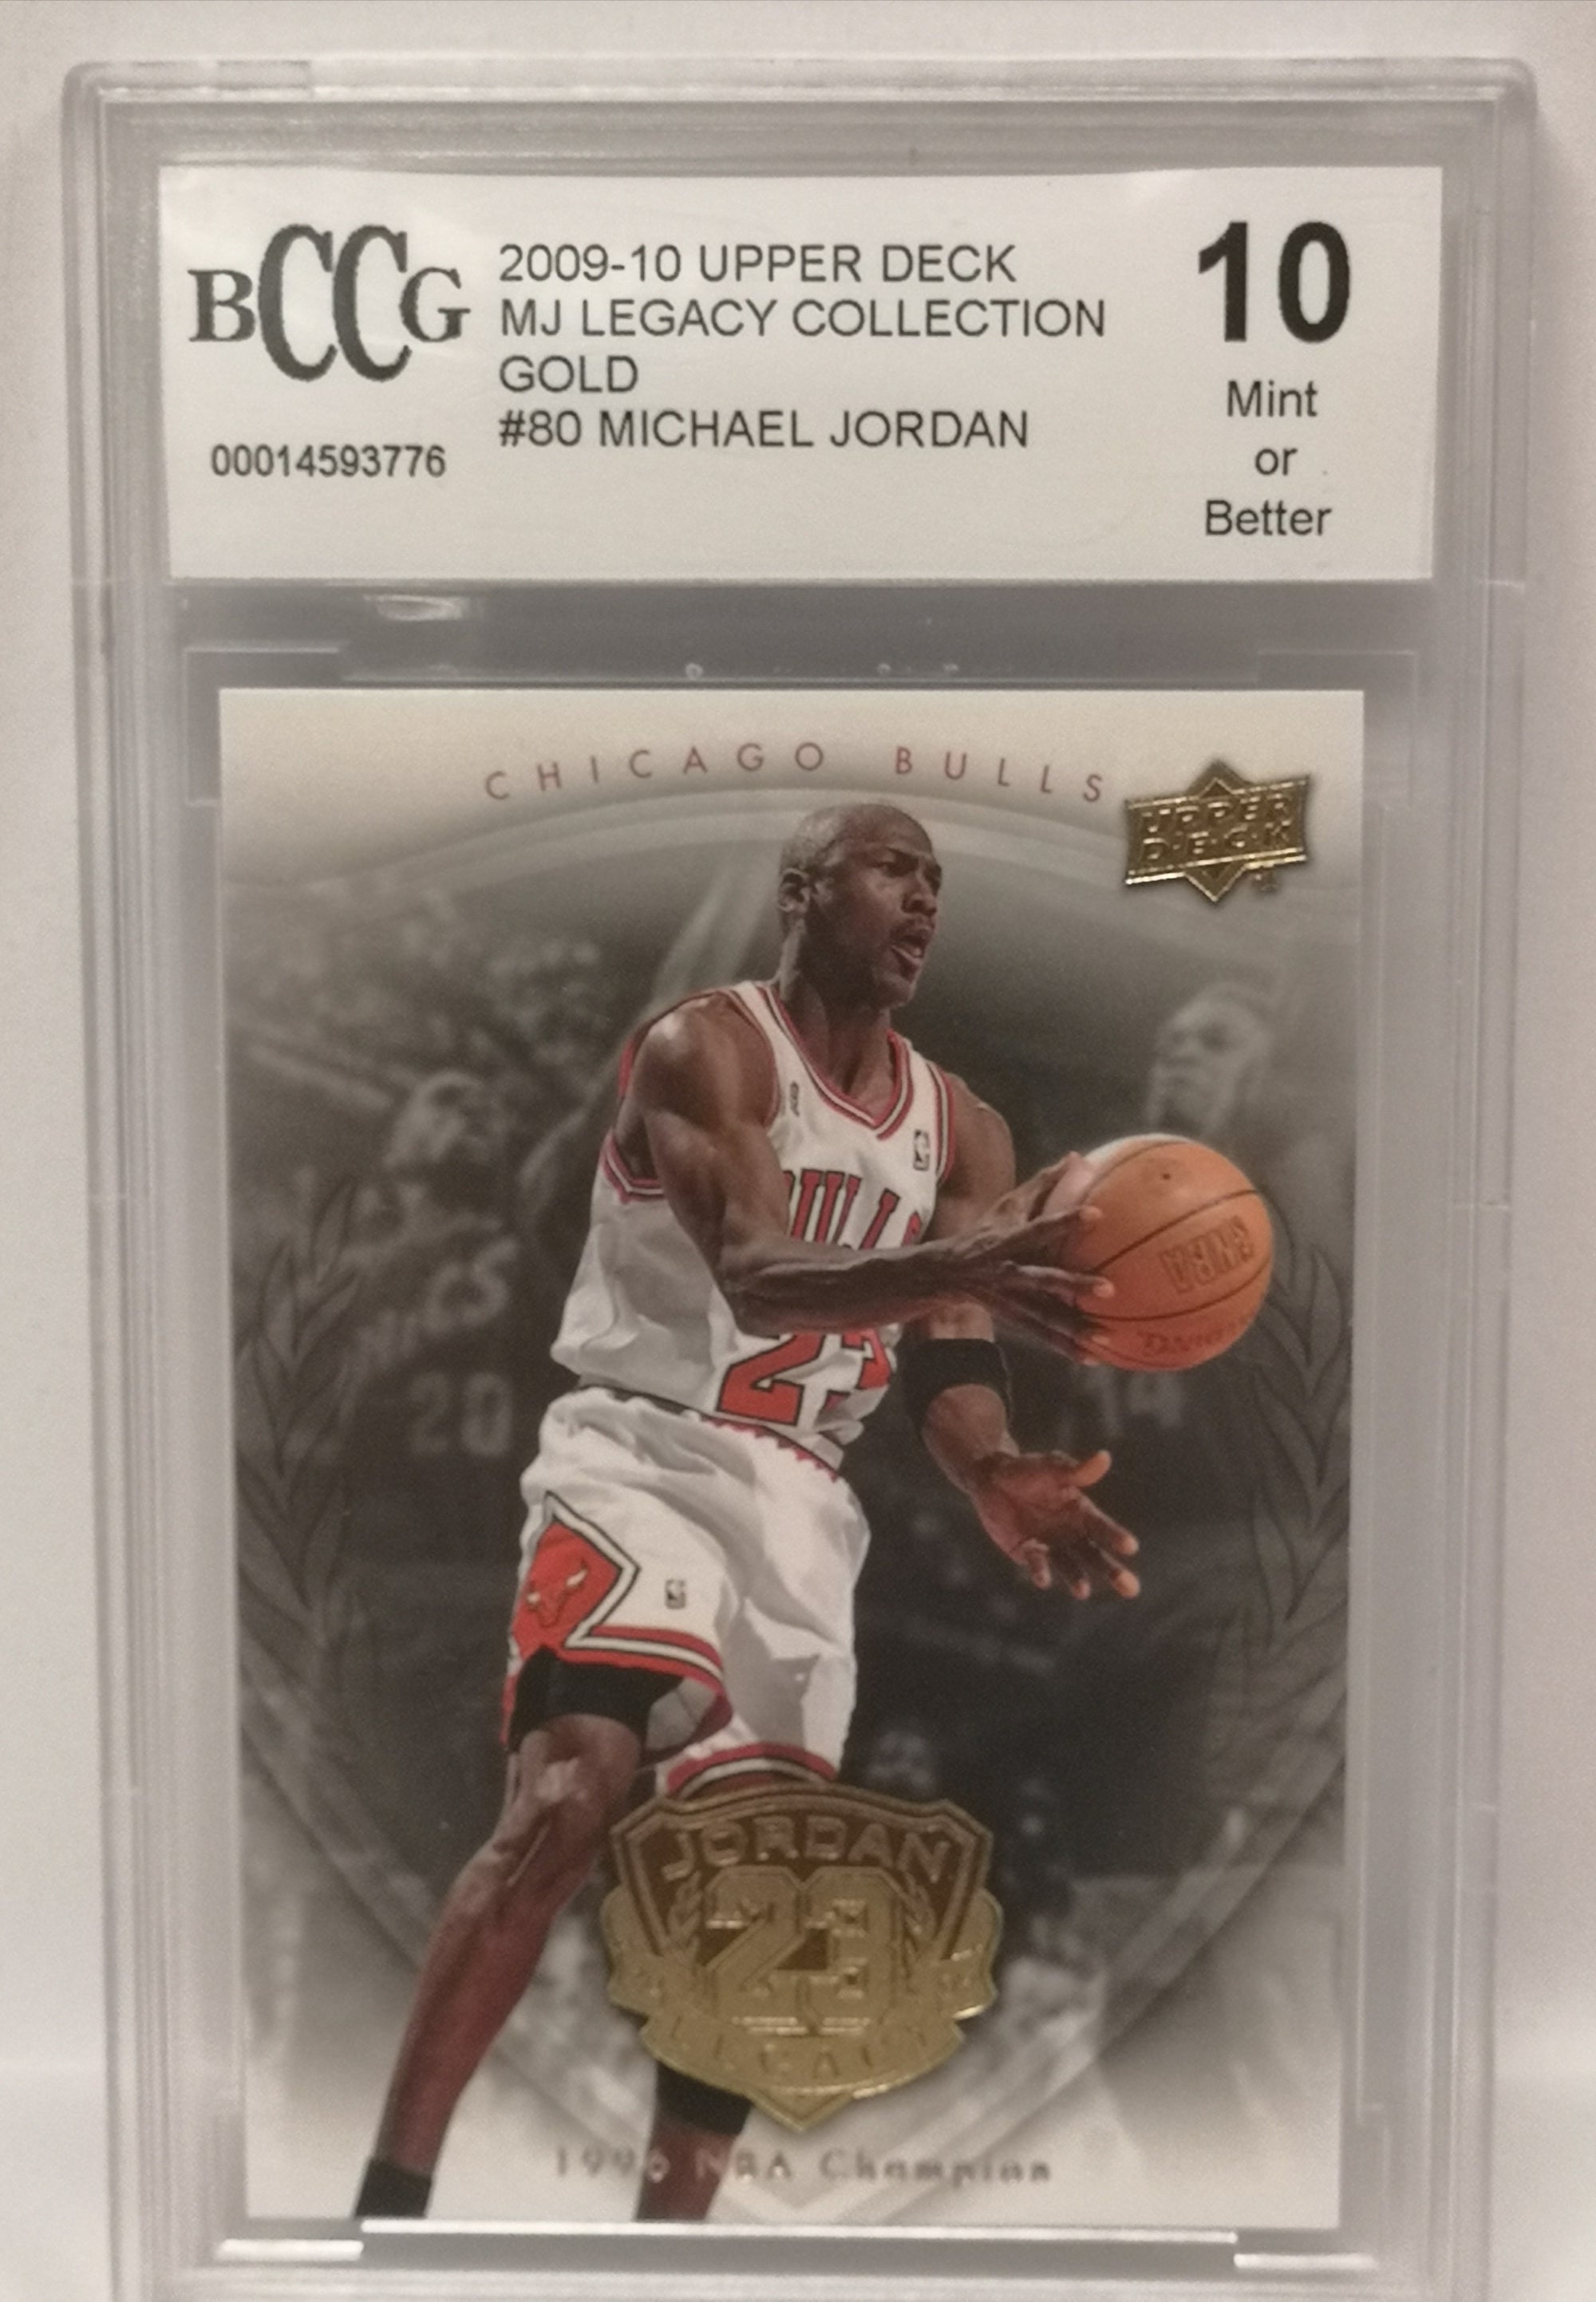 2009-10 Upper Deck MJ Legacy Collection Gold Single Card (Graded)